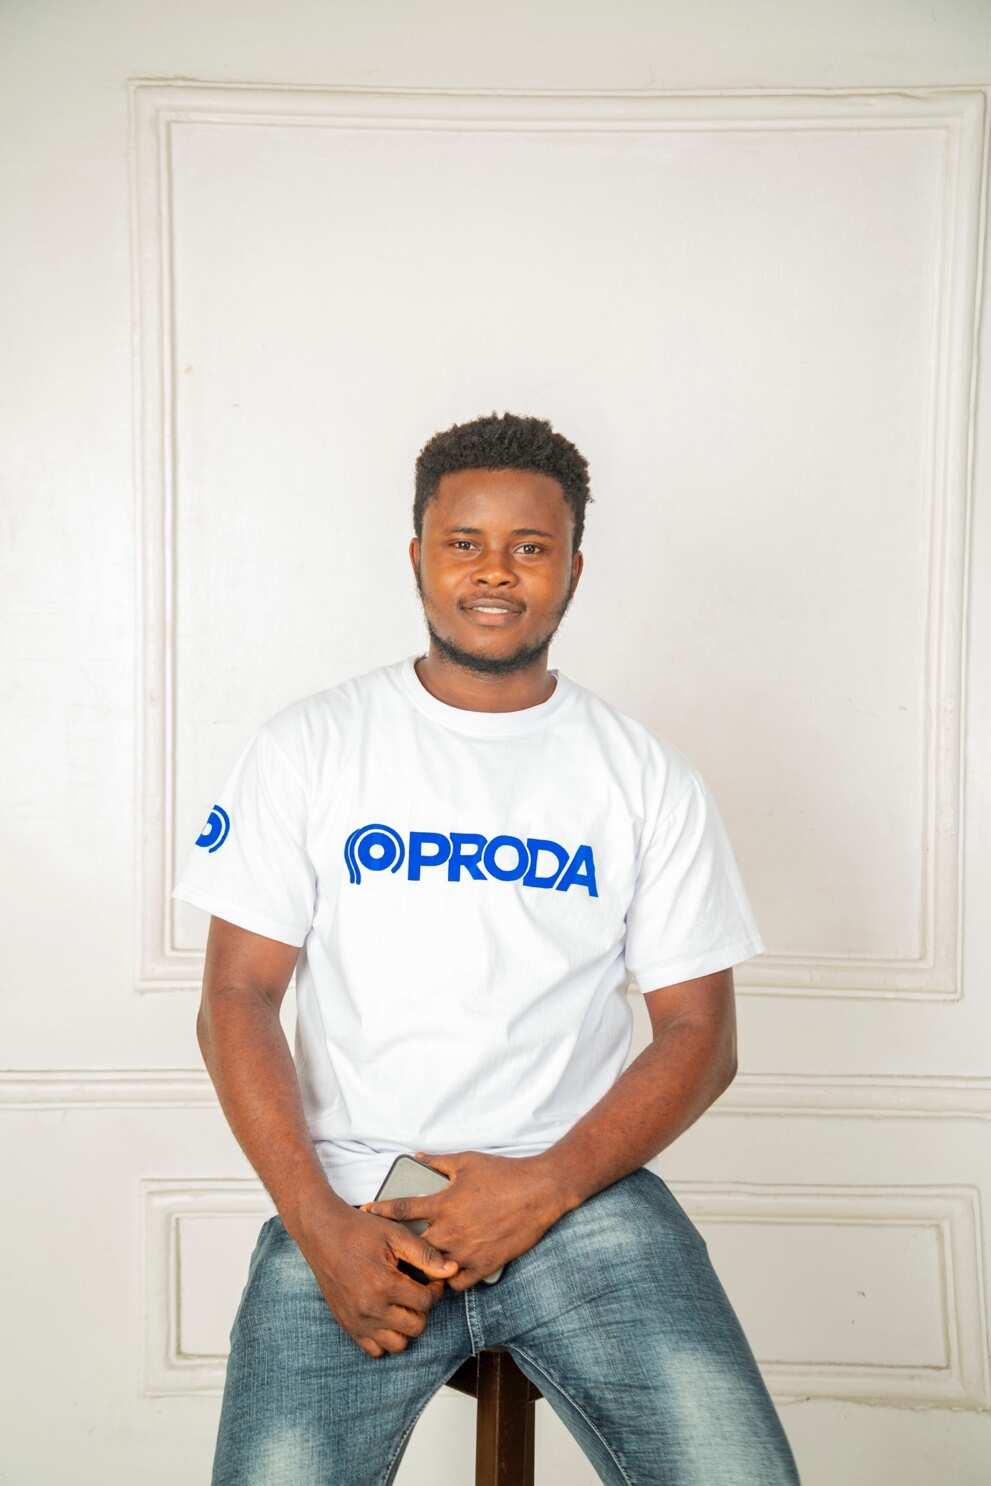 26-year-old Launches Luxurious yet Affordable Wristwatch and Gift Item Brand, PRODA